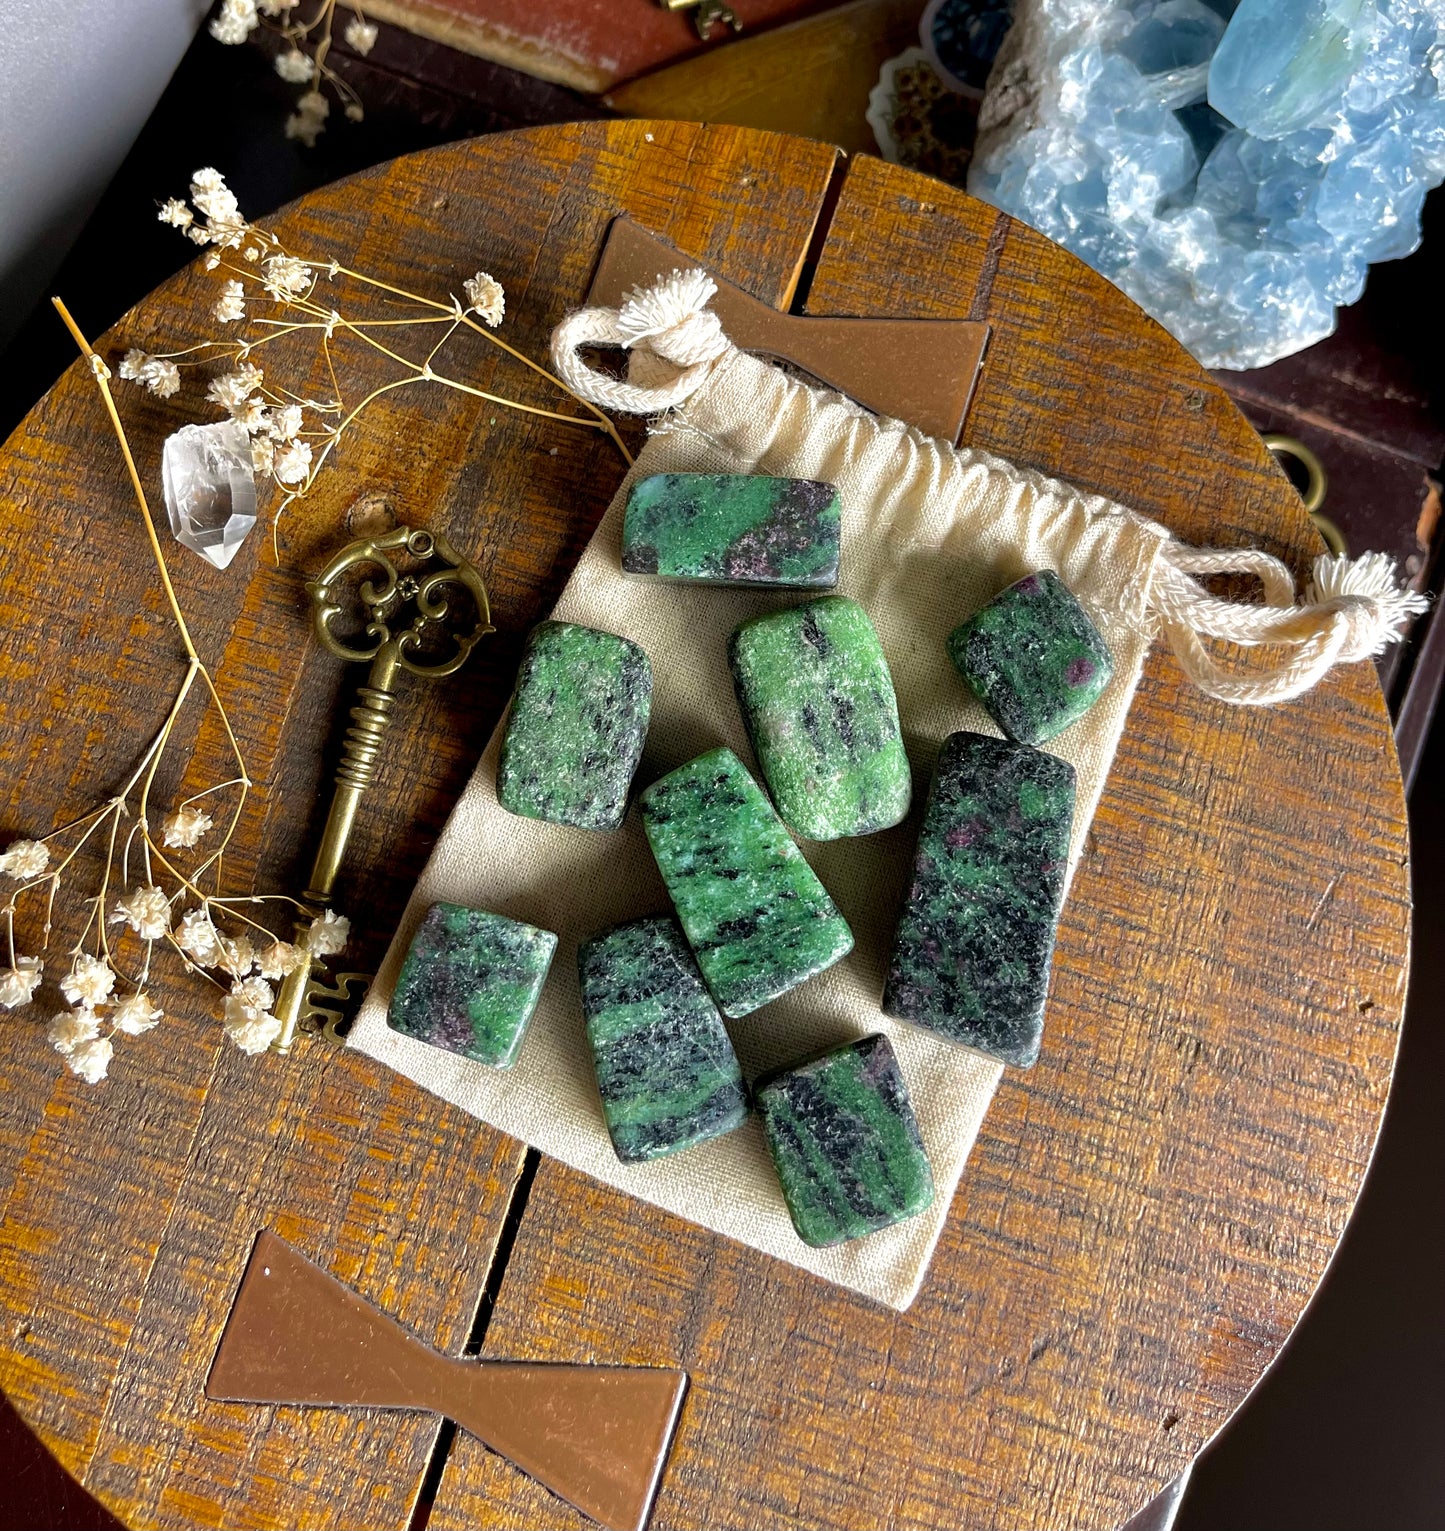 ruby in zoisite (anyolite) cubes | tumbled